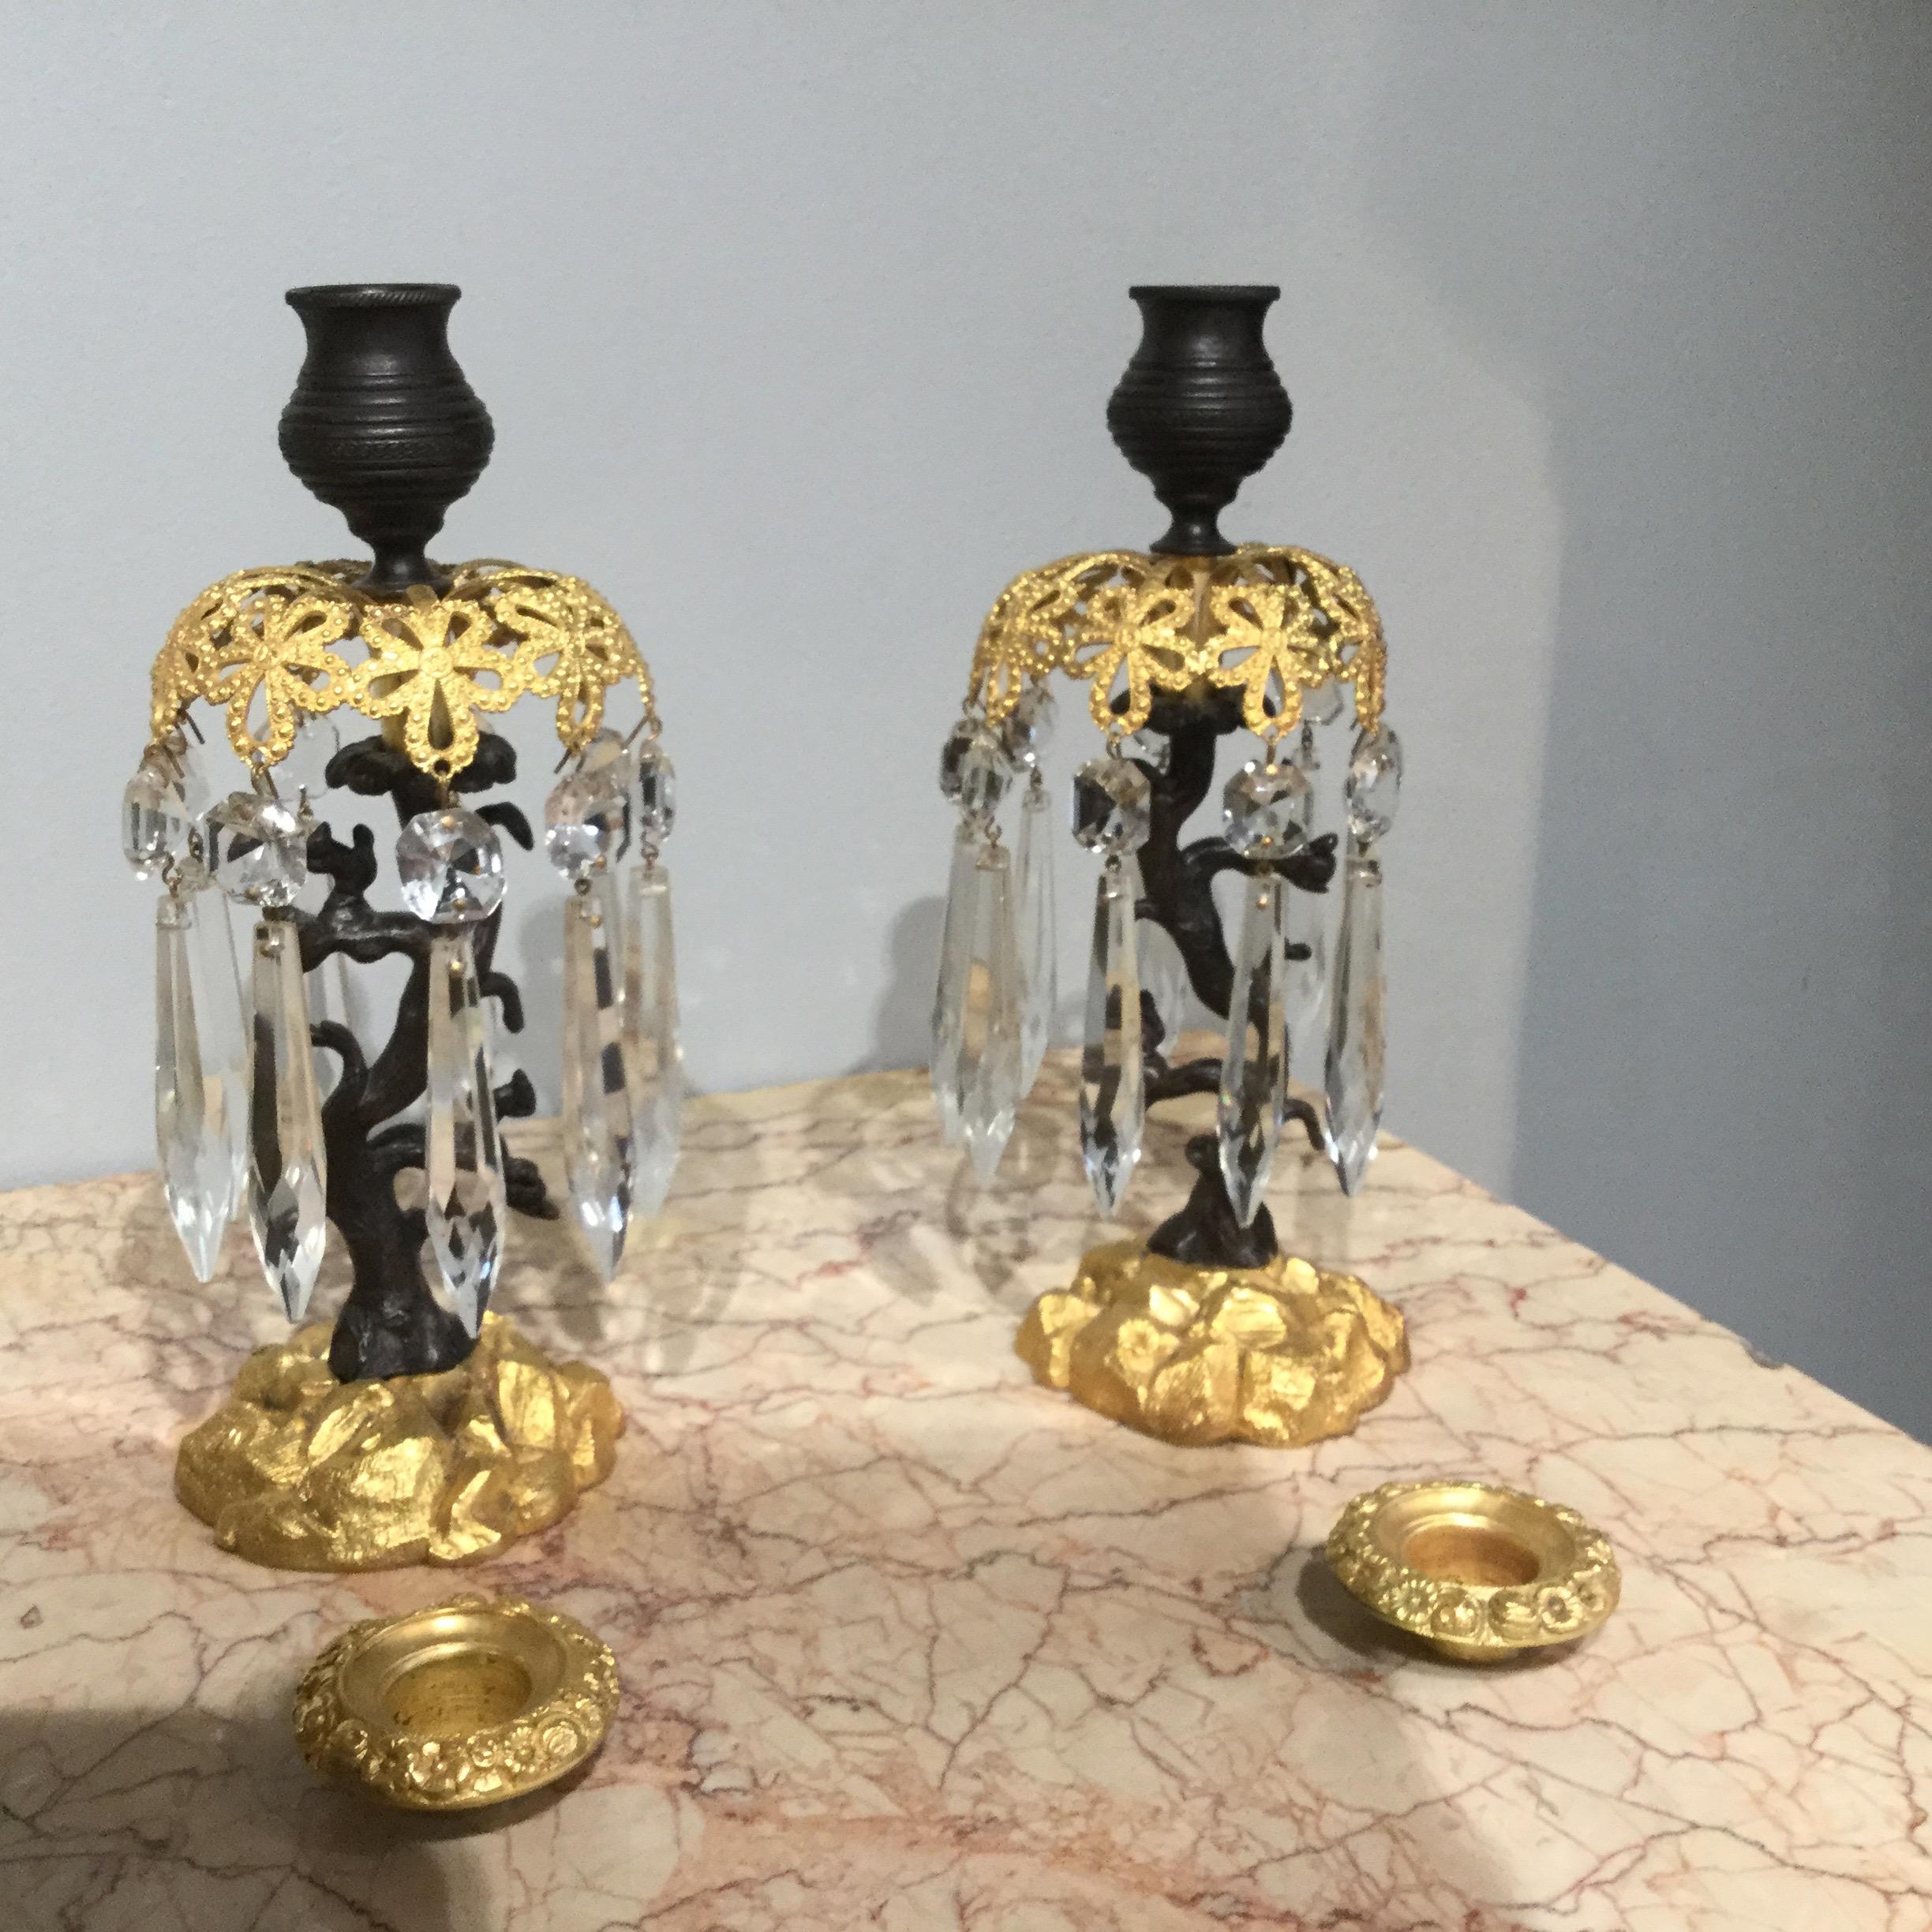 English Pair of Early 19th Century William IV Period Gilt Brass Candlestick Lustres For Sale